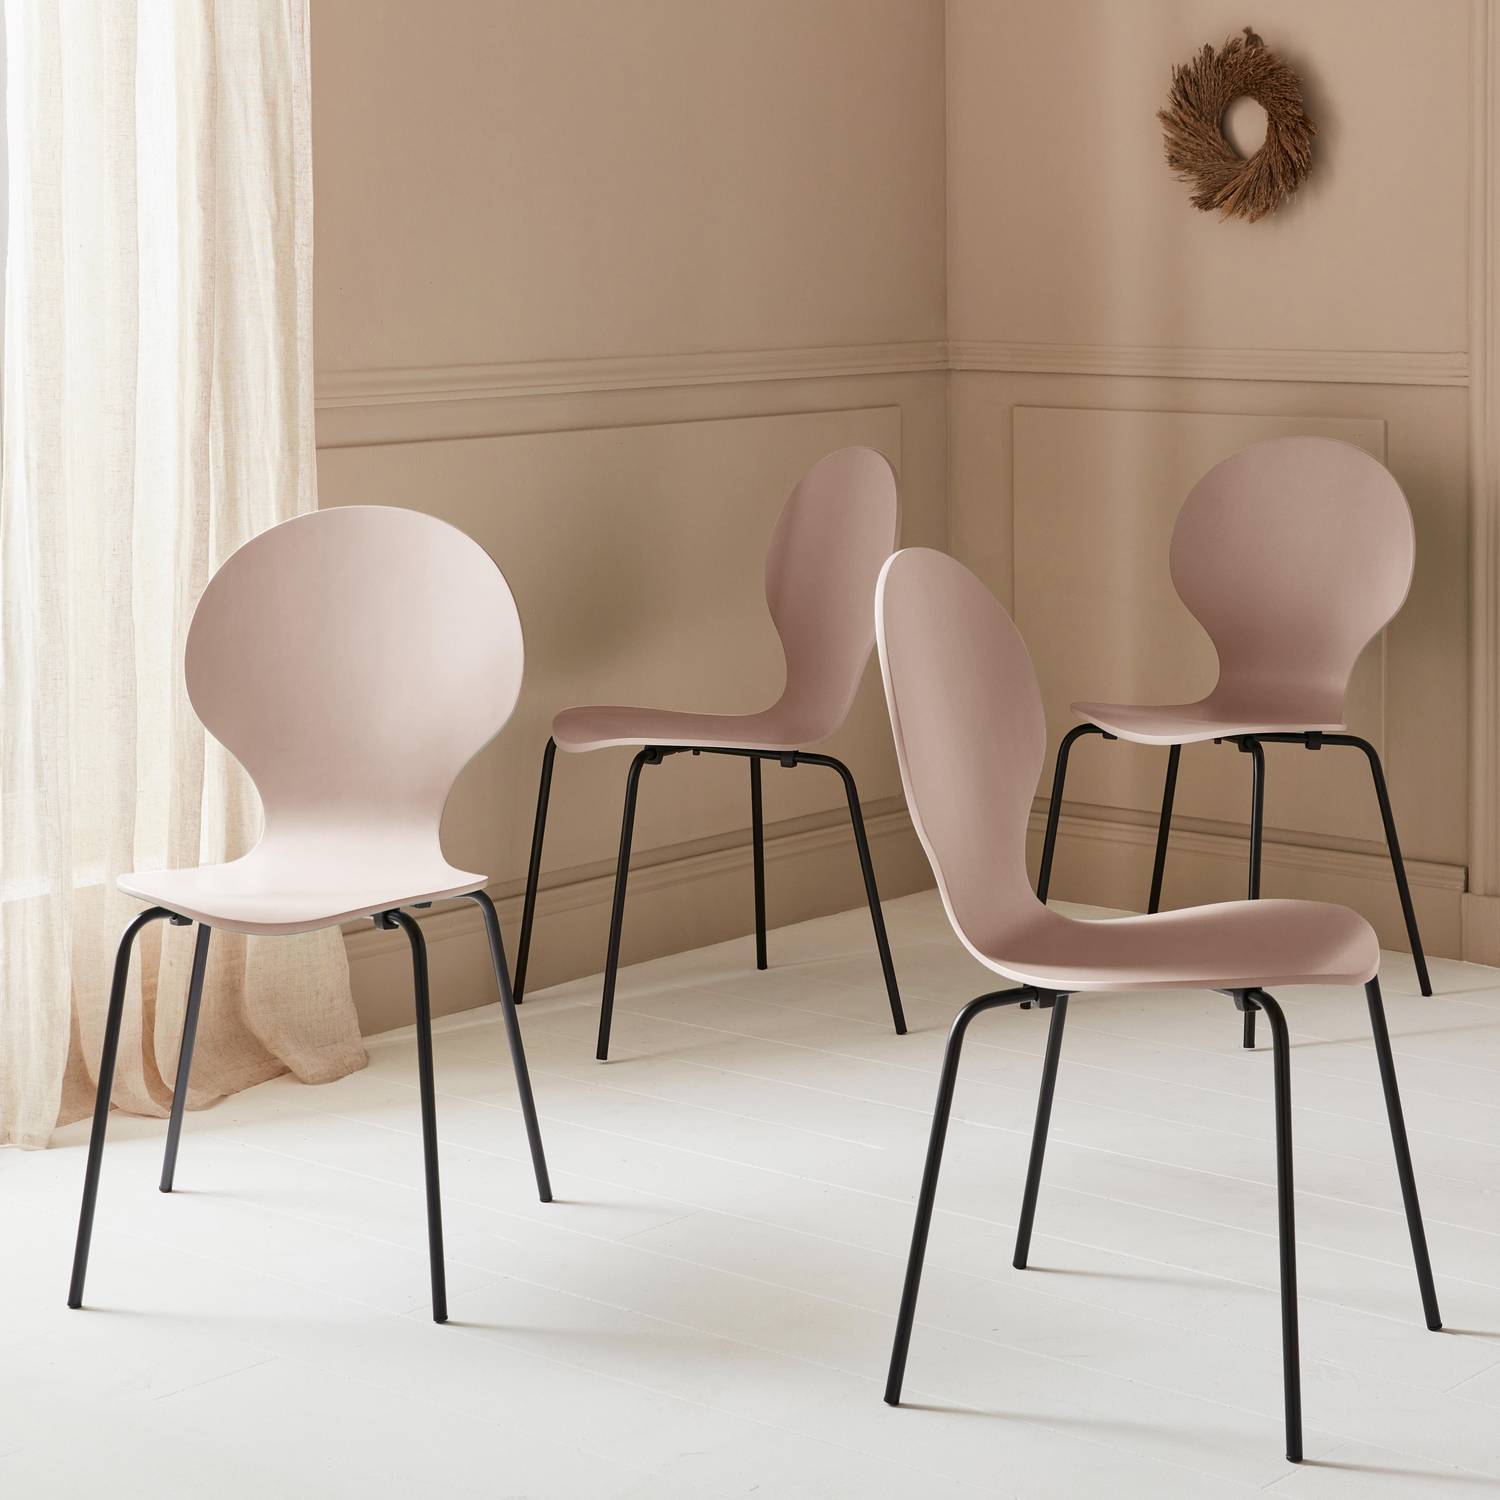 Set of 4 stackable Retro Chairs, Wood and Plywood, L43xW48xH87cm, pink Photo1